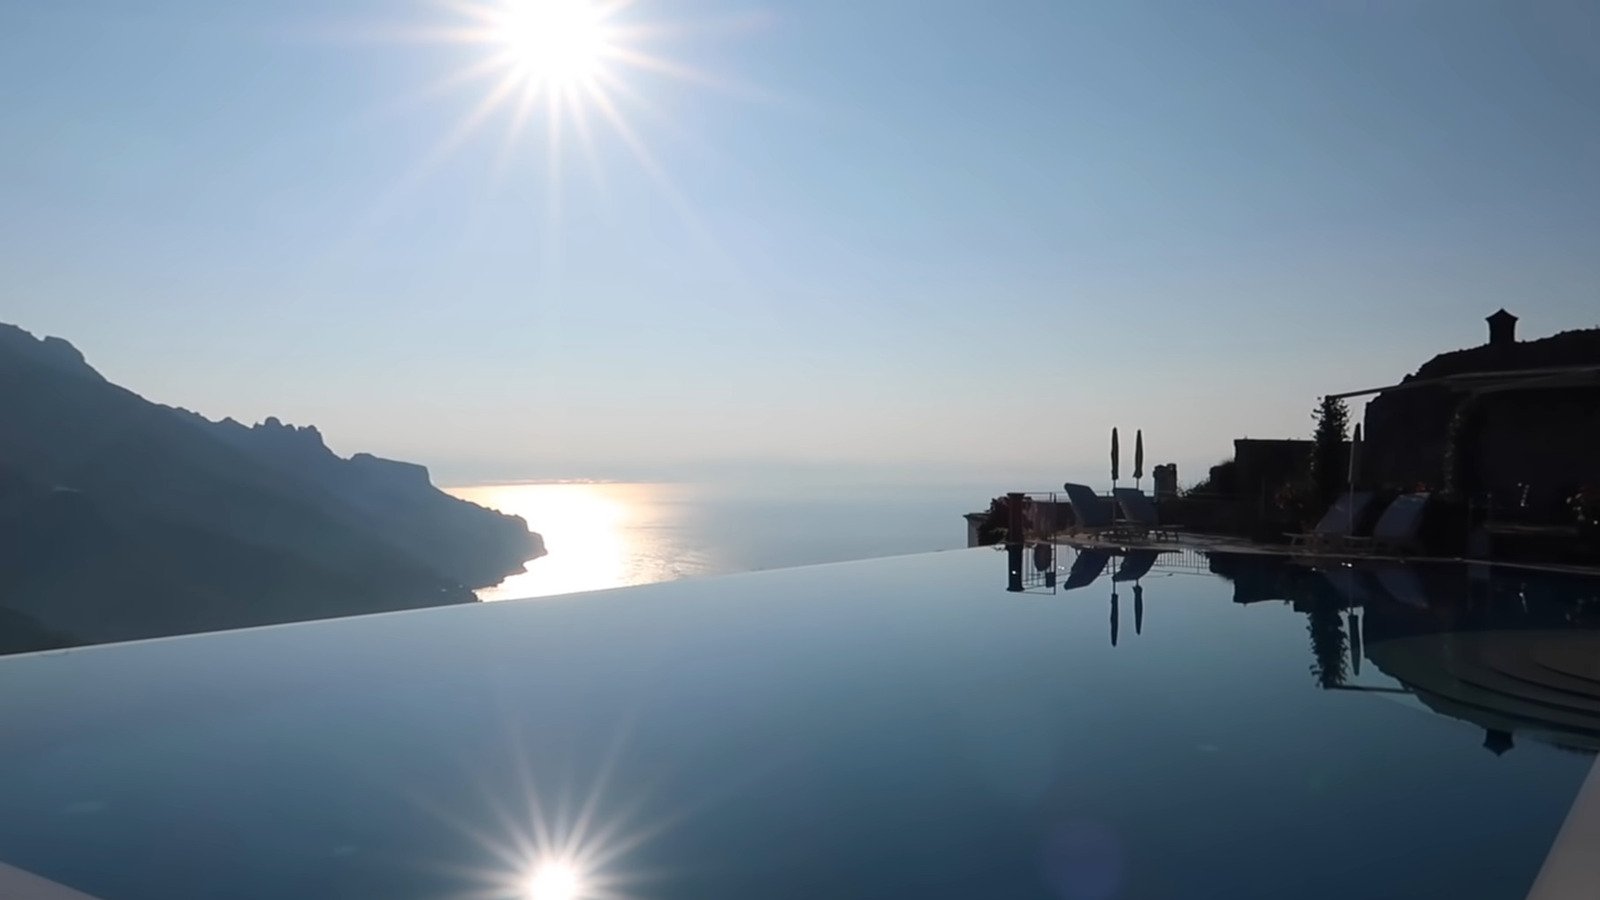 This Hotel's World-Famous Infinity Pool Offers Magnificent Views Overlooking The Amalfi Coast